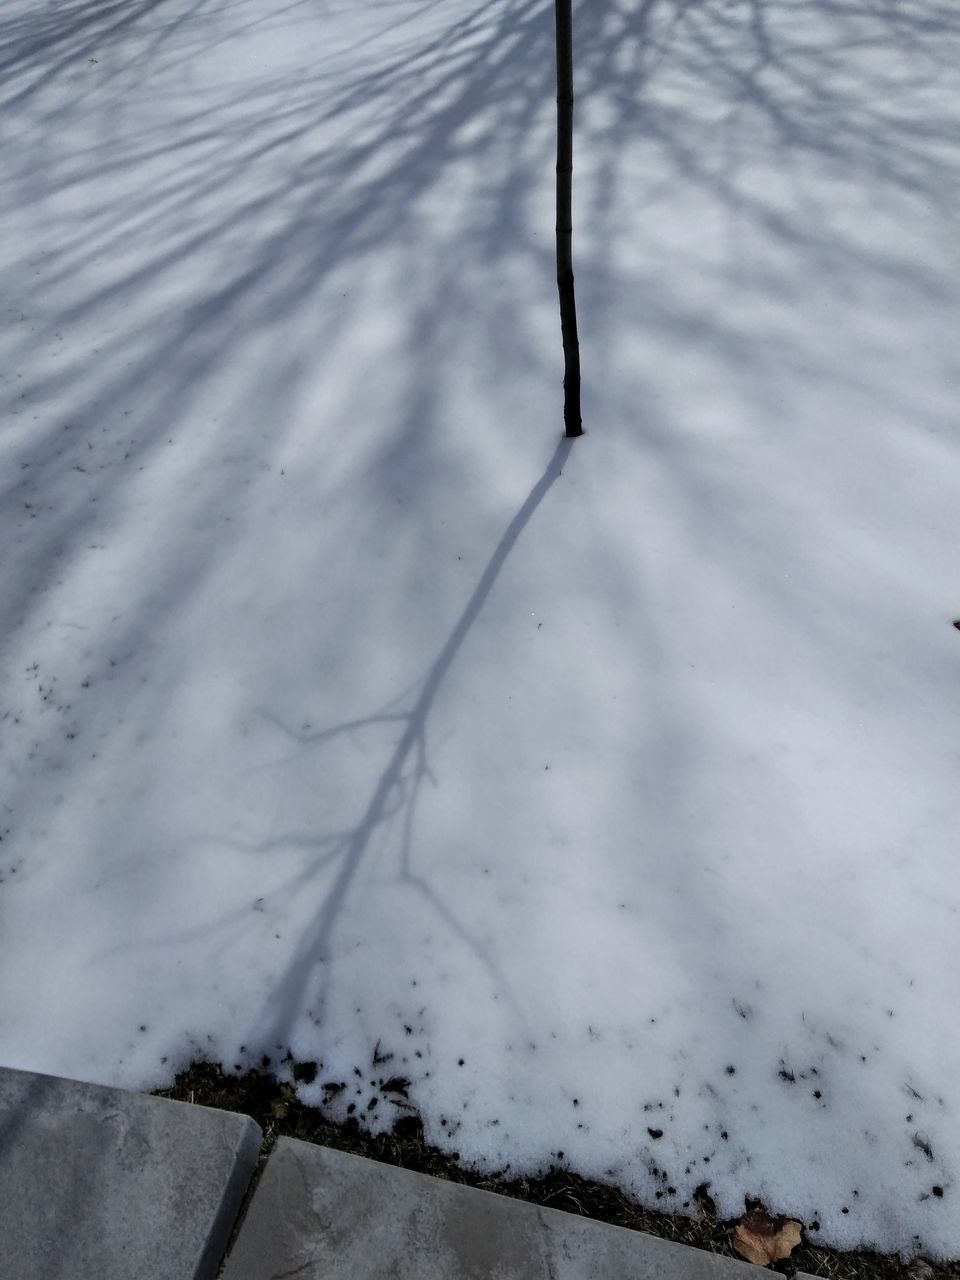 HIGH ANGLE VIEW OF SNOW ON FIELD AGAINST TREES